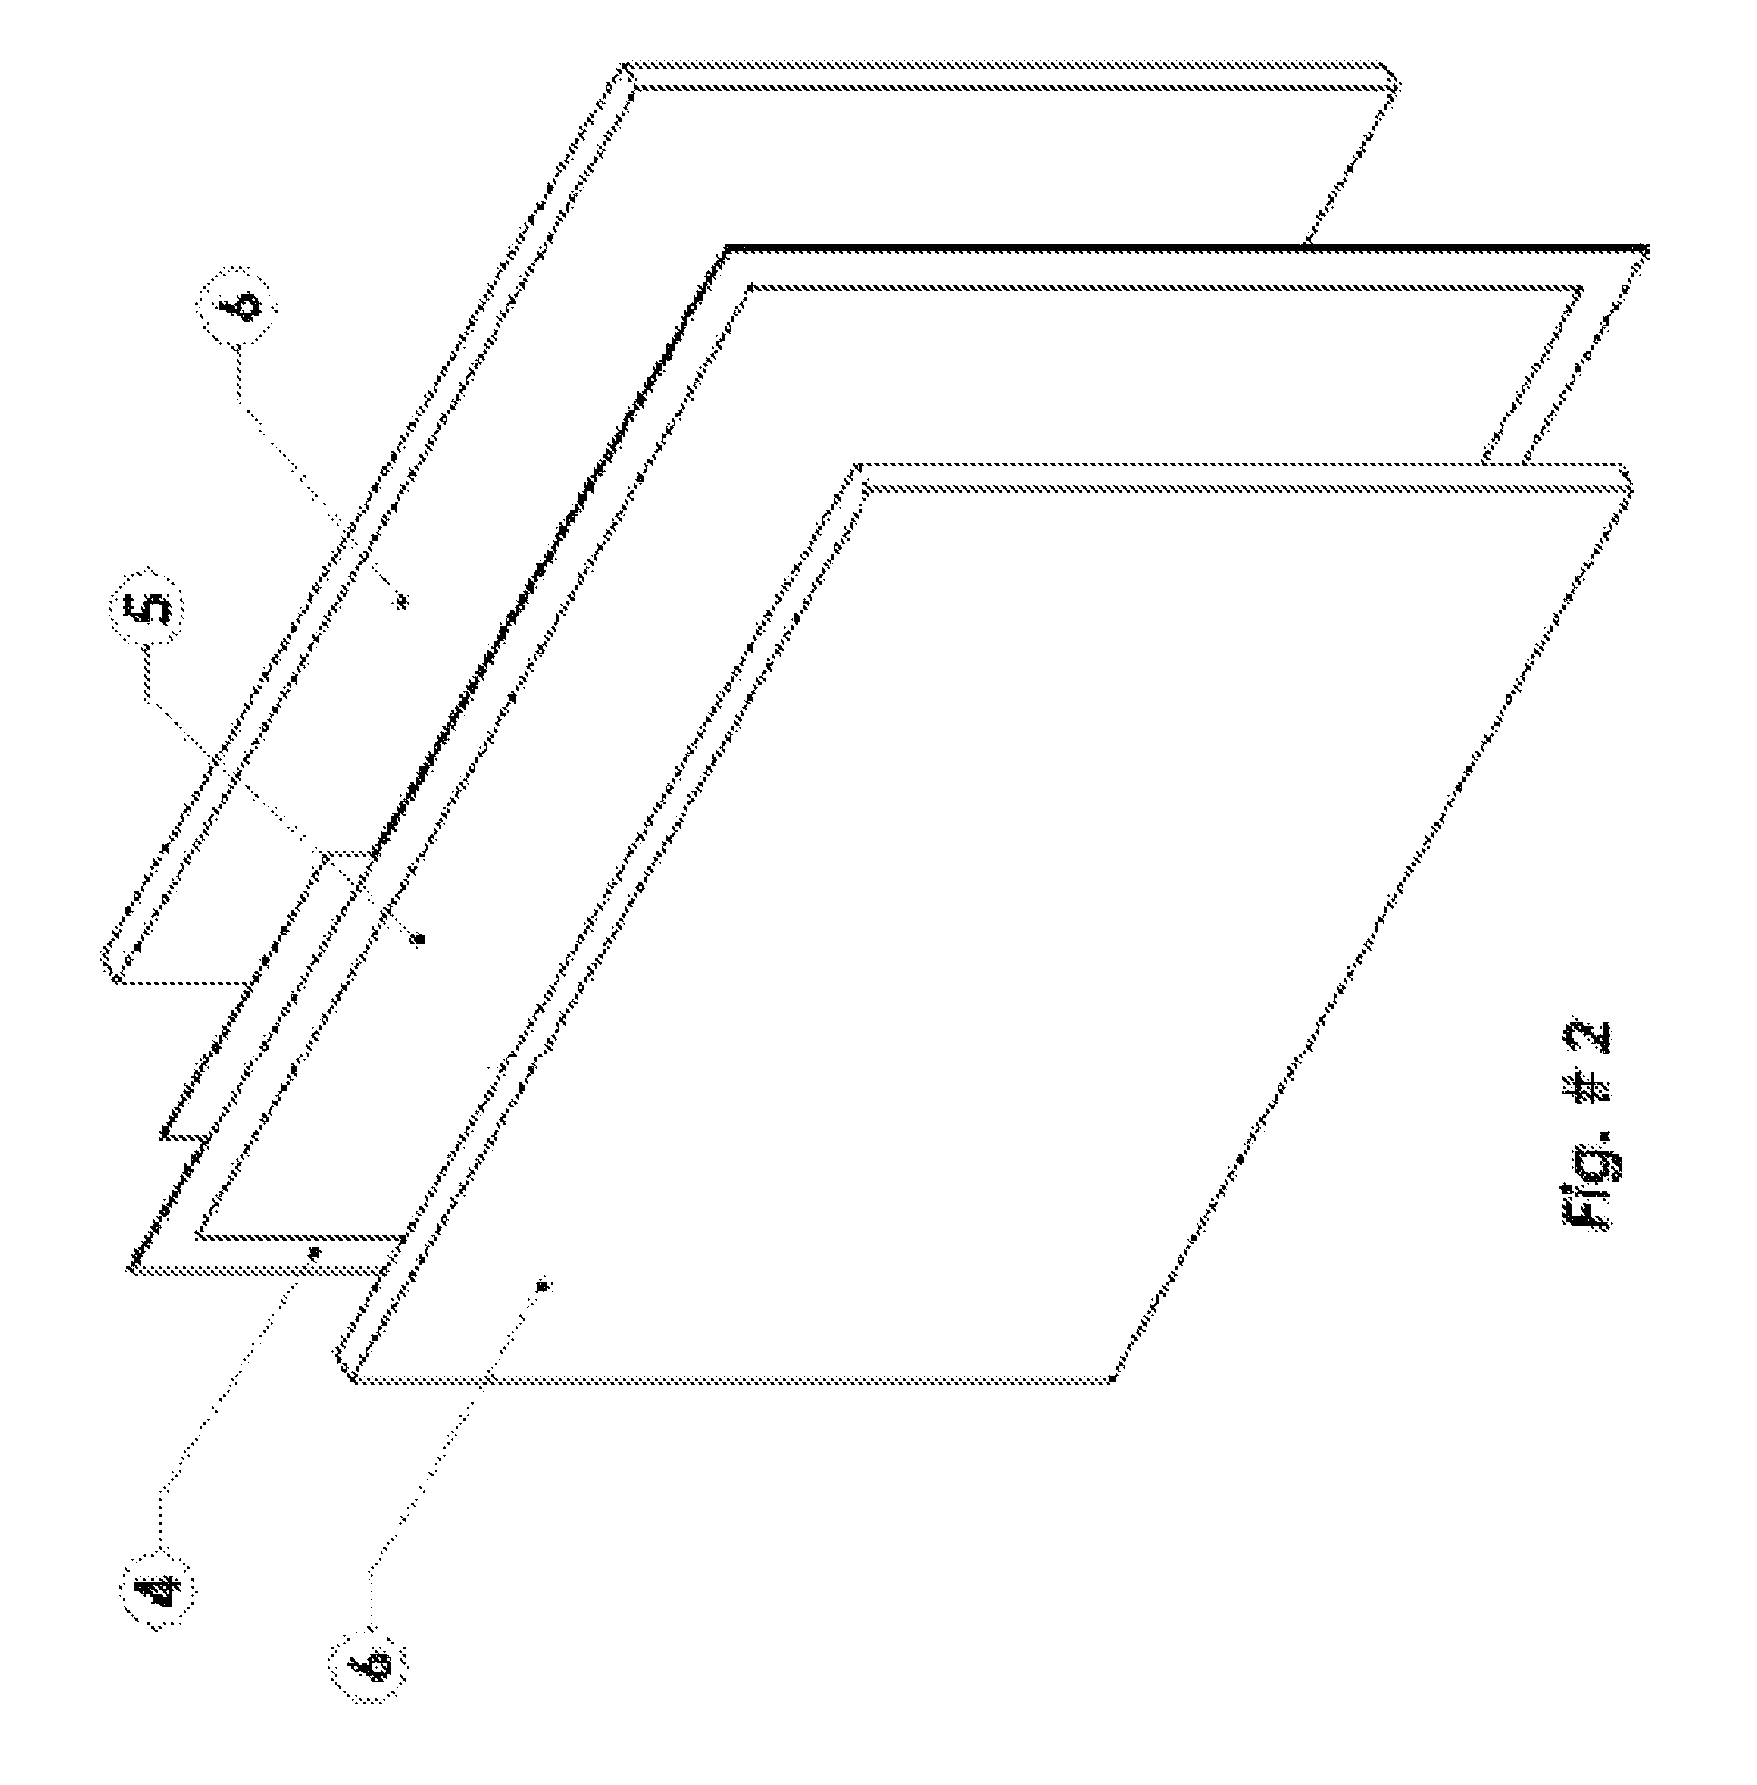 Cell assembly for an energy storage device with activated carbon electrodes